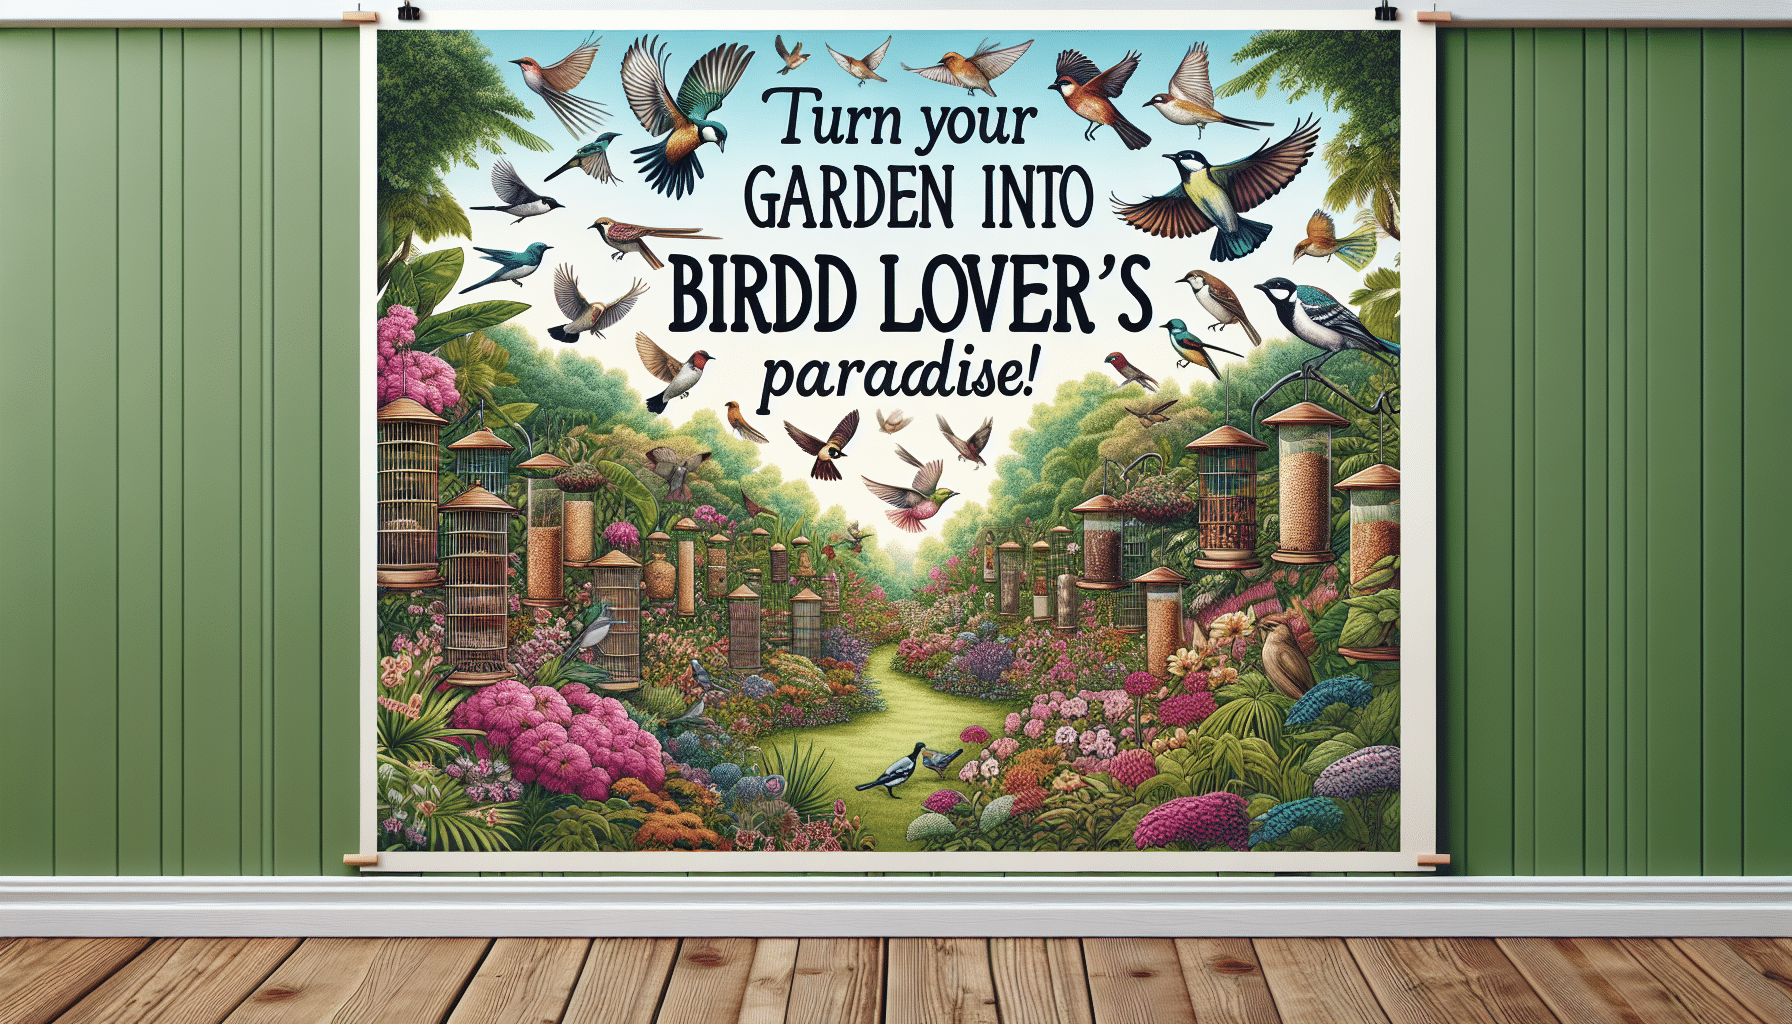 discover how to transform your garden into a bird lover's paradise and attract more feathered visitors with expert tips and ideas.